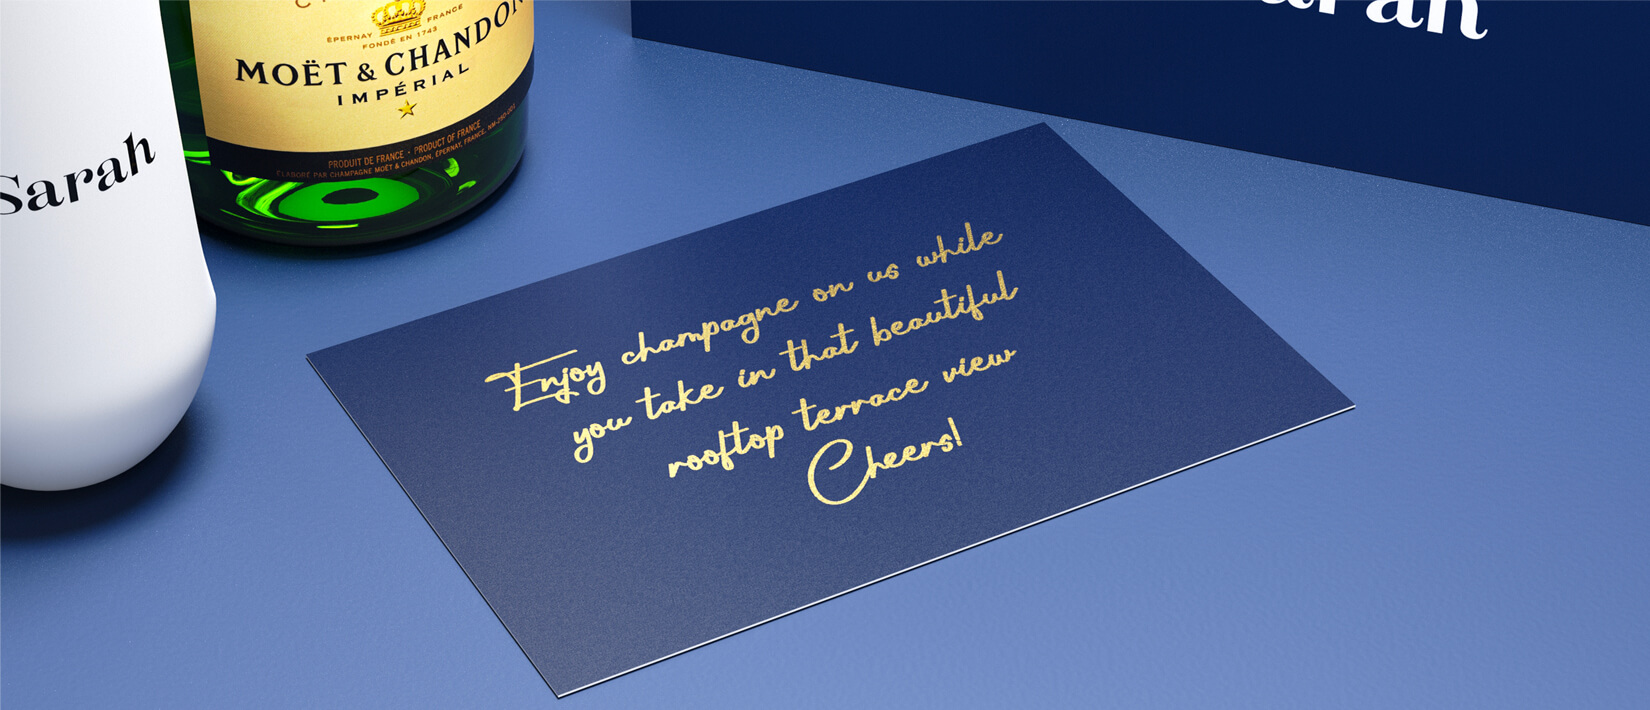 Celebratory champagne flutes and bottle in a personalized gift box.